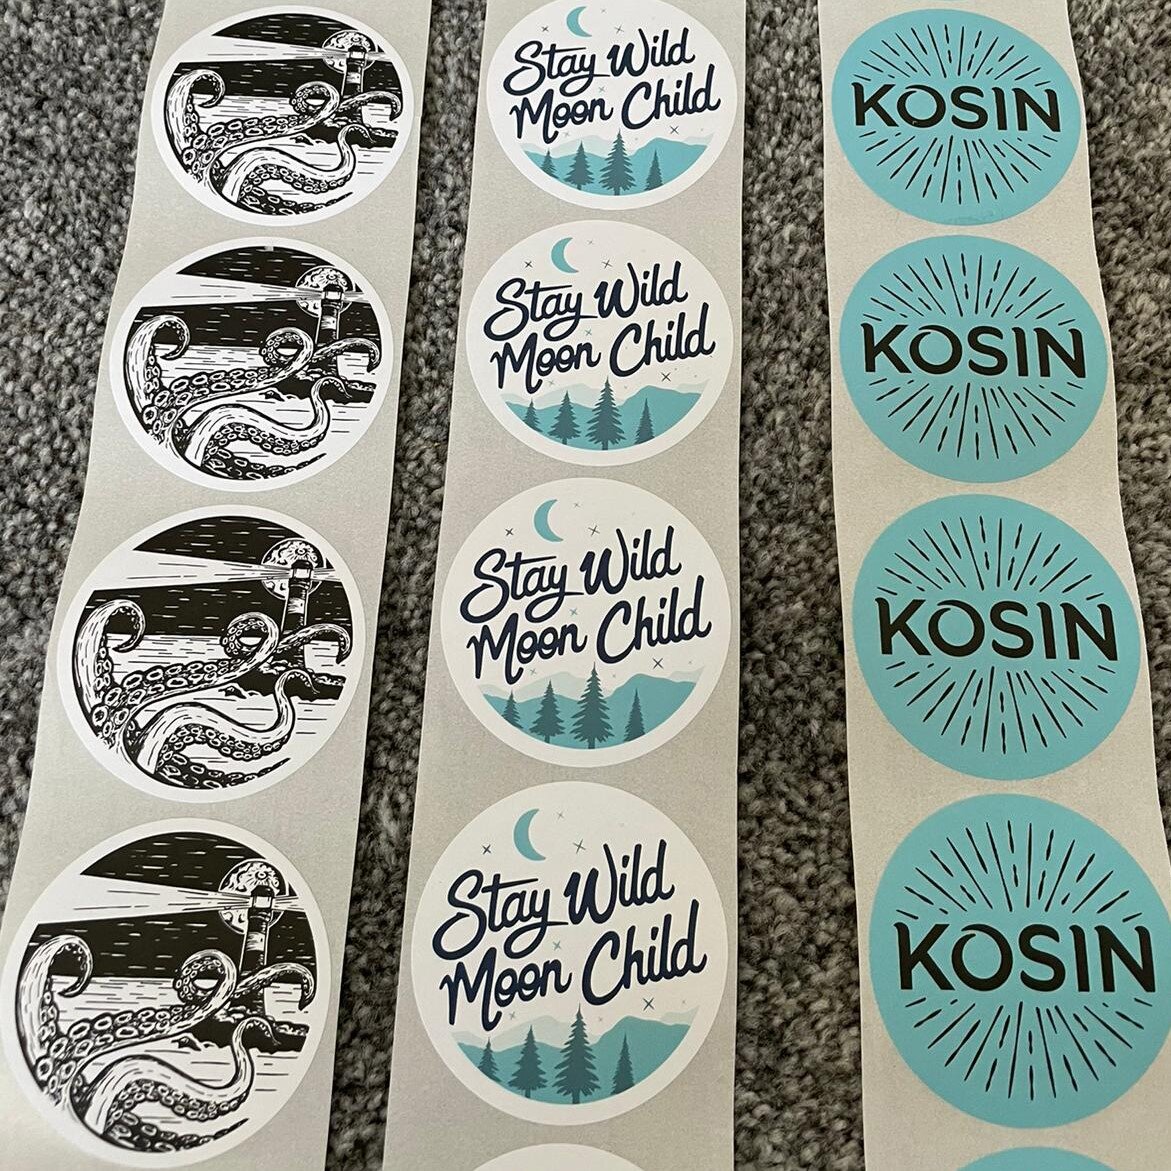 Kosin Sustainable Labels